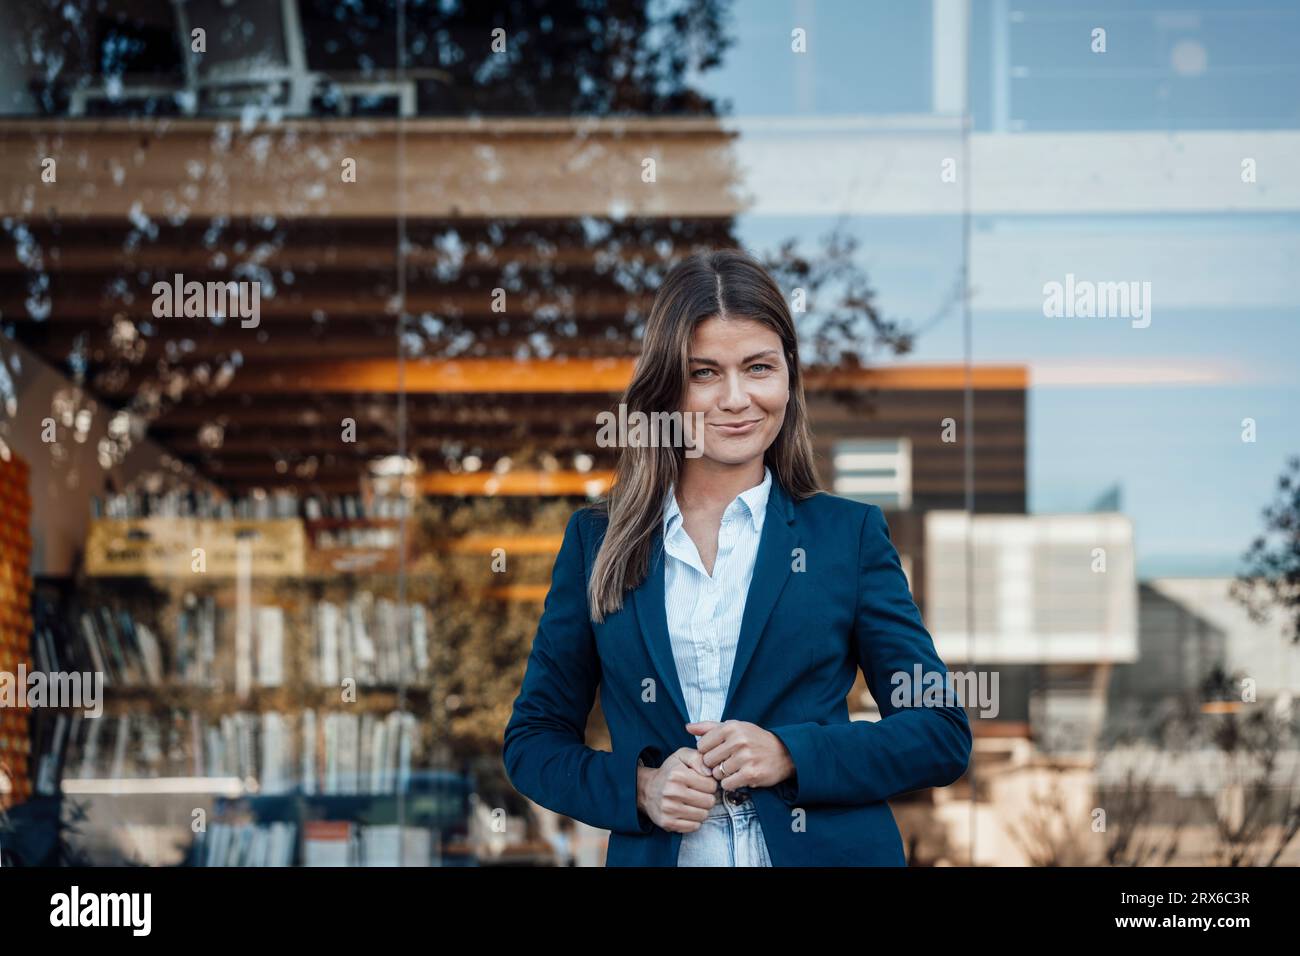 Happy businesswoman wearing blazer standing in front of glass Stock Photo